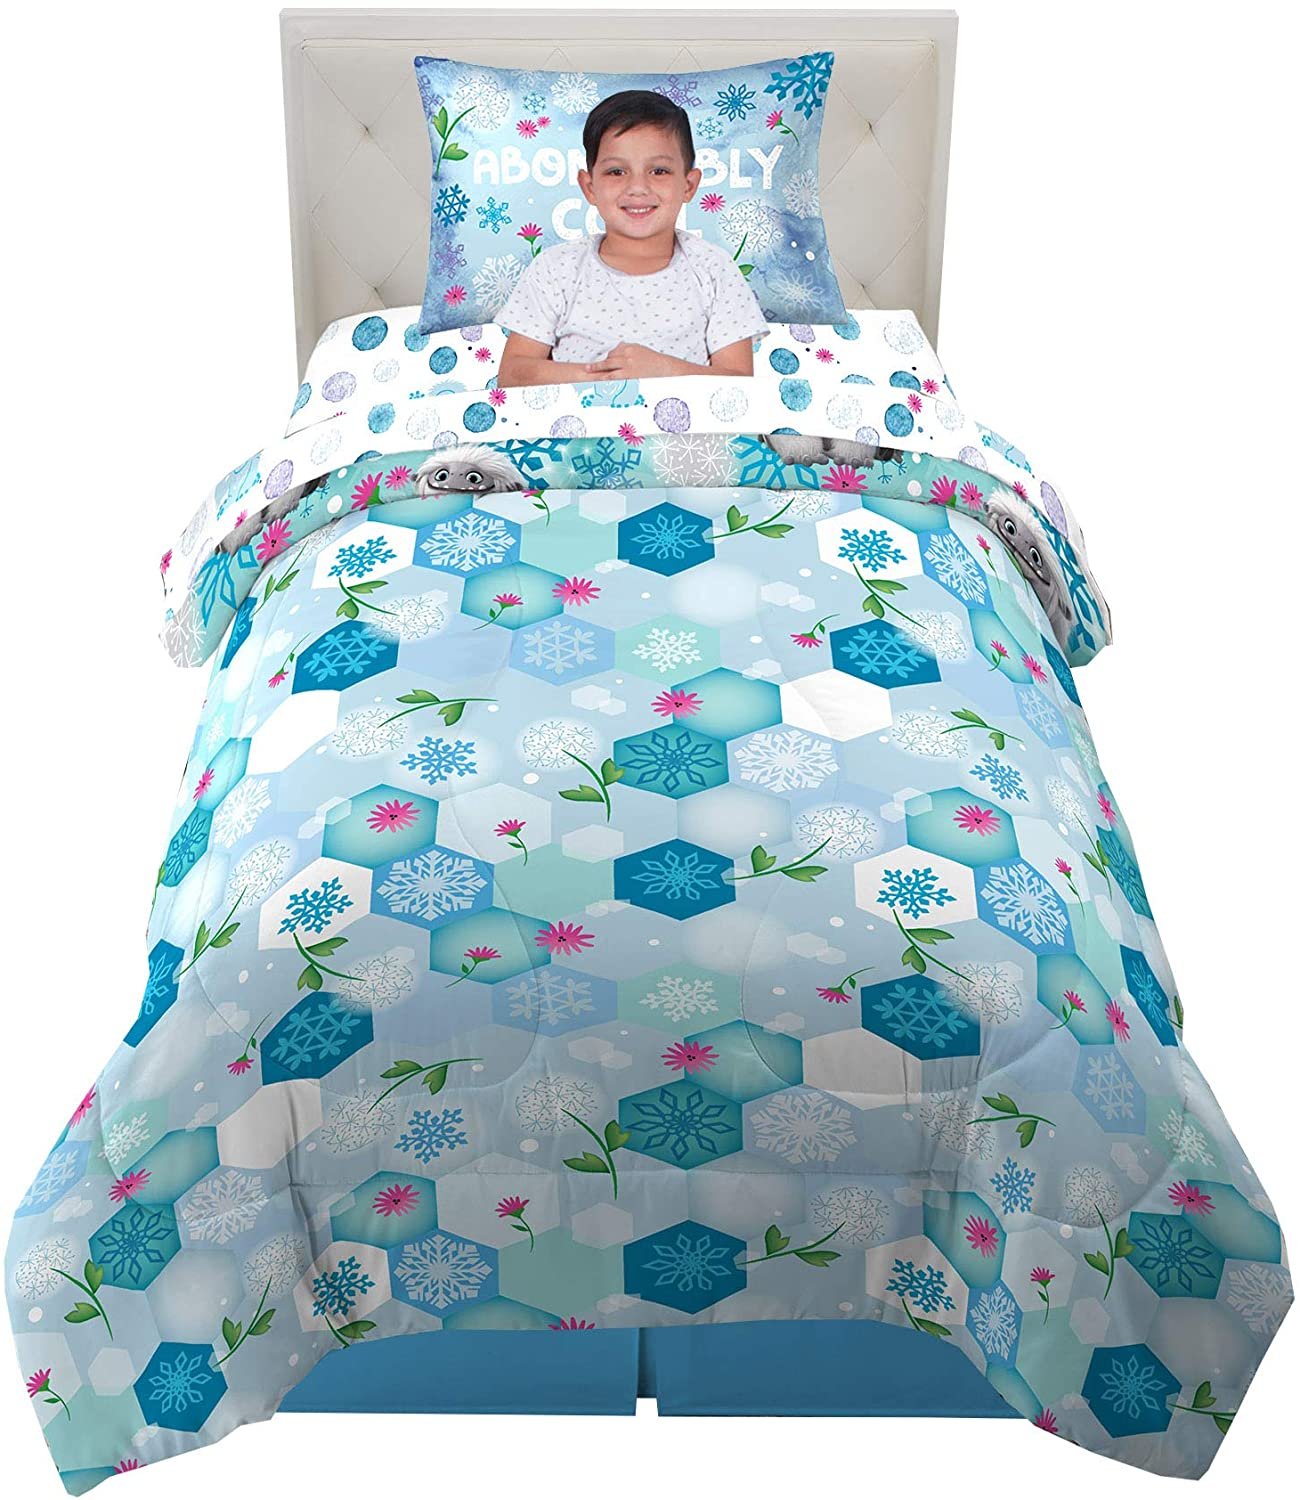 Franco Kids Bedding Comforter and Sheet Set, 4 Piece Twin Size, Abominable - image 2 of 9